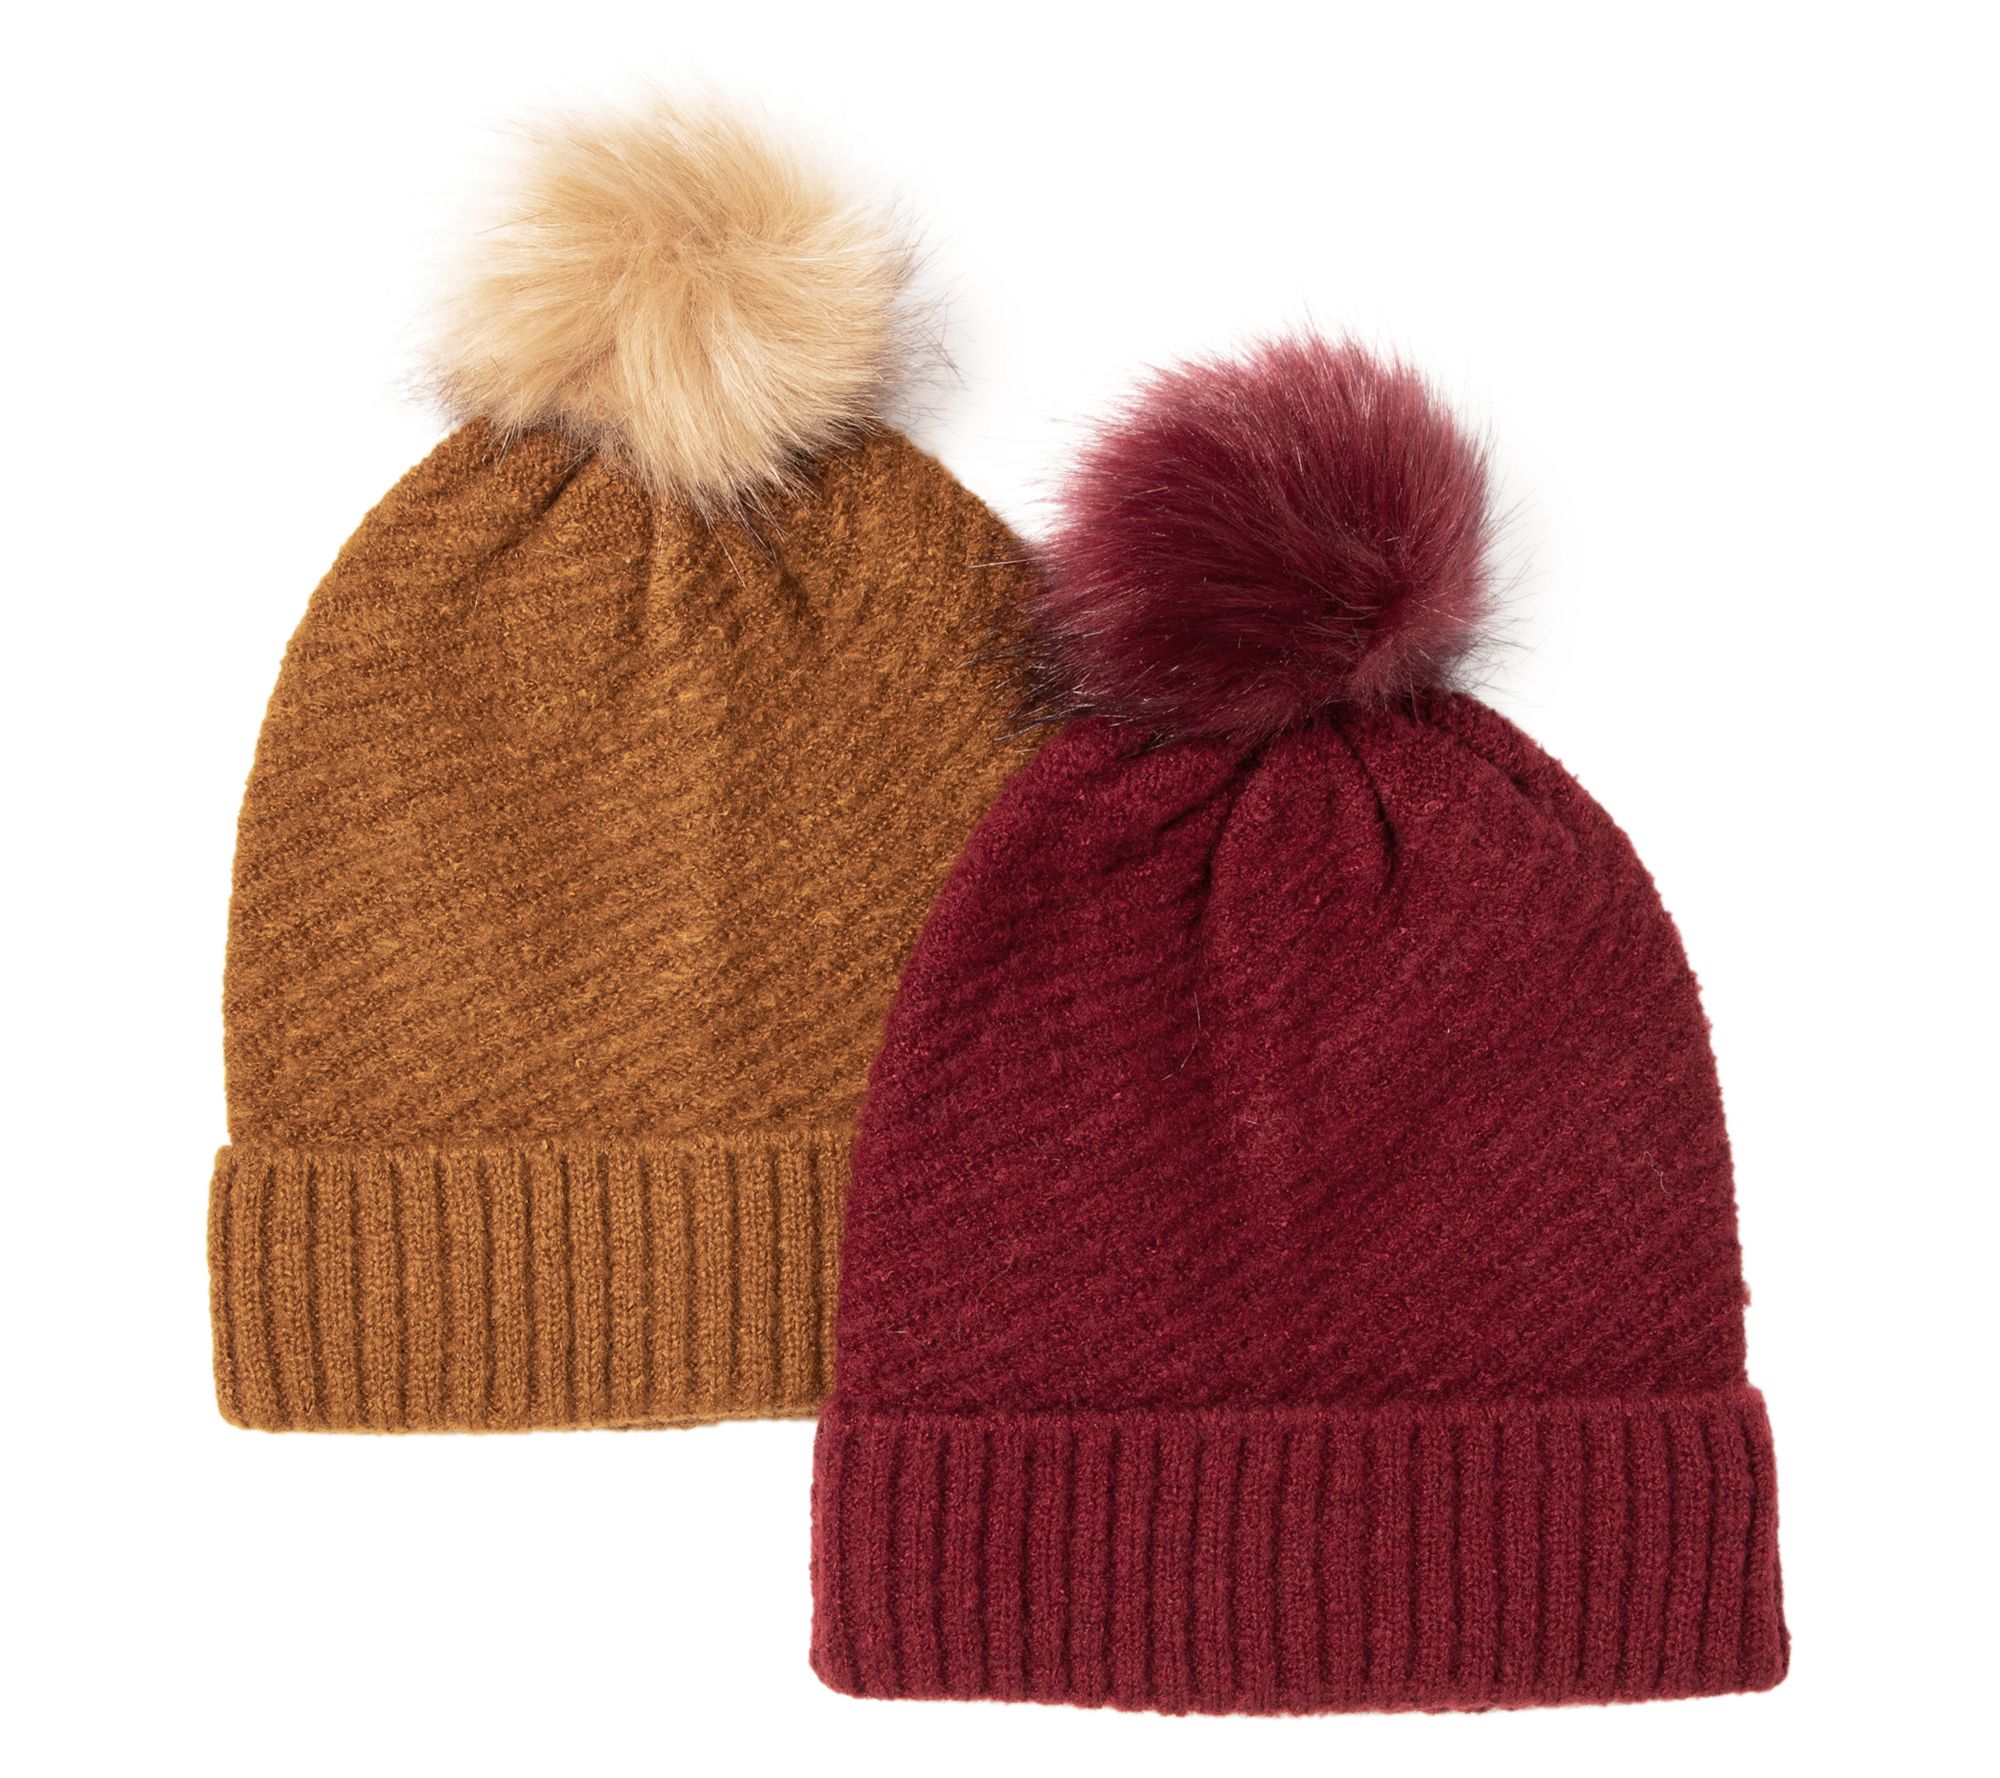 San Hat Co. of Beanies with Poms QVC.com